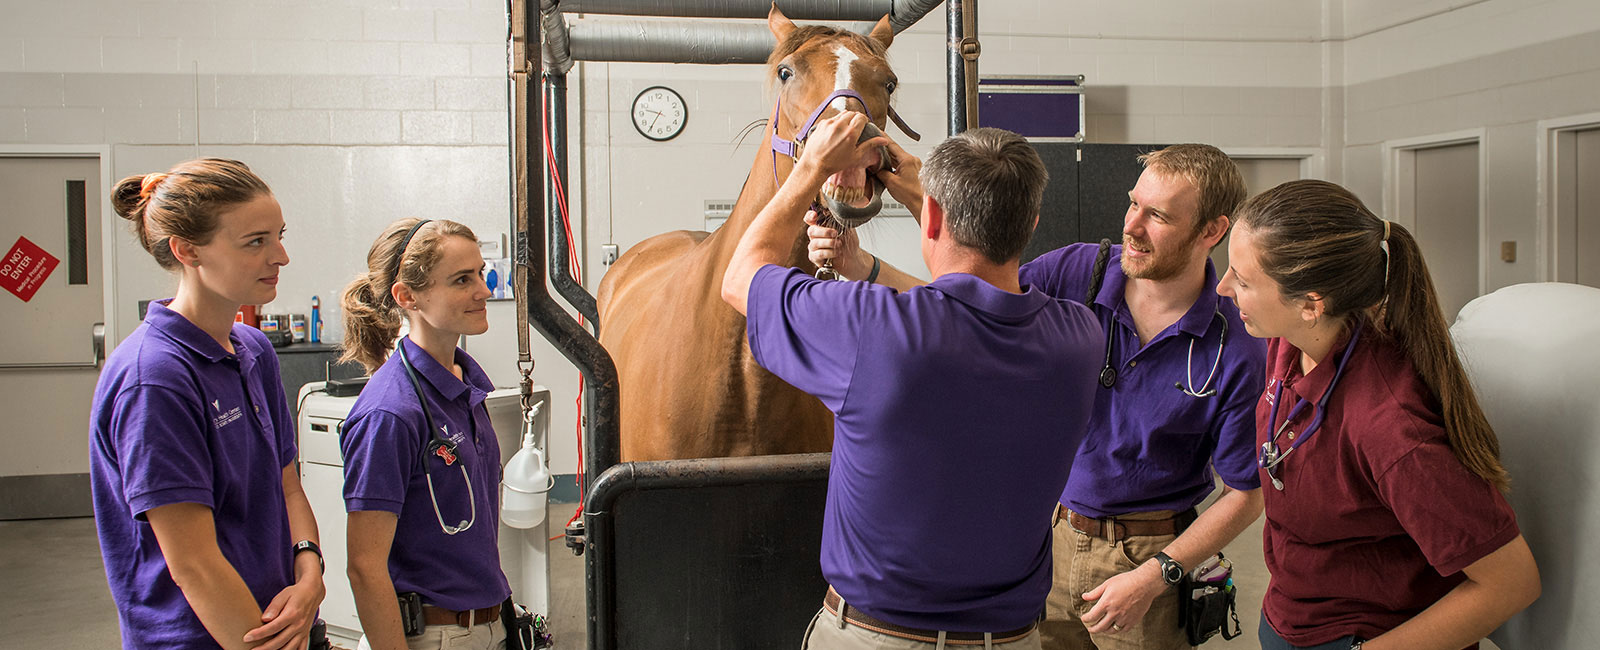 K-State instructor demonstrating horse examination to students.